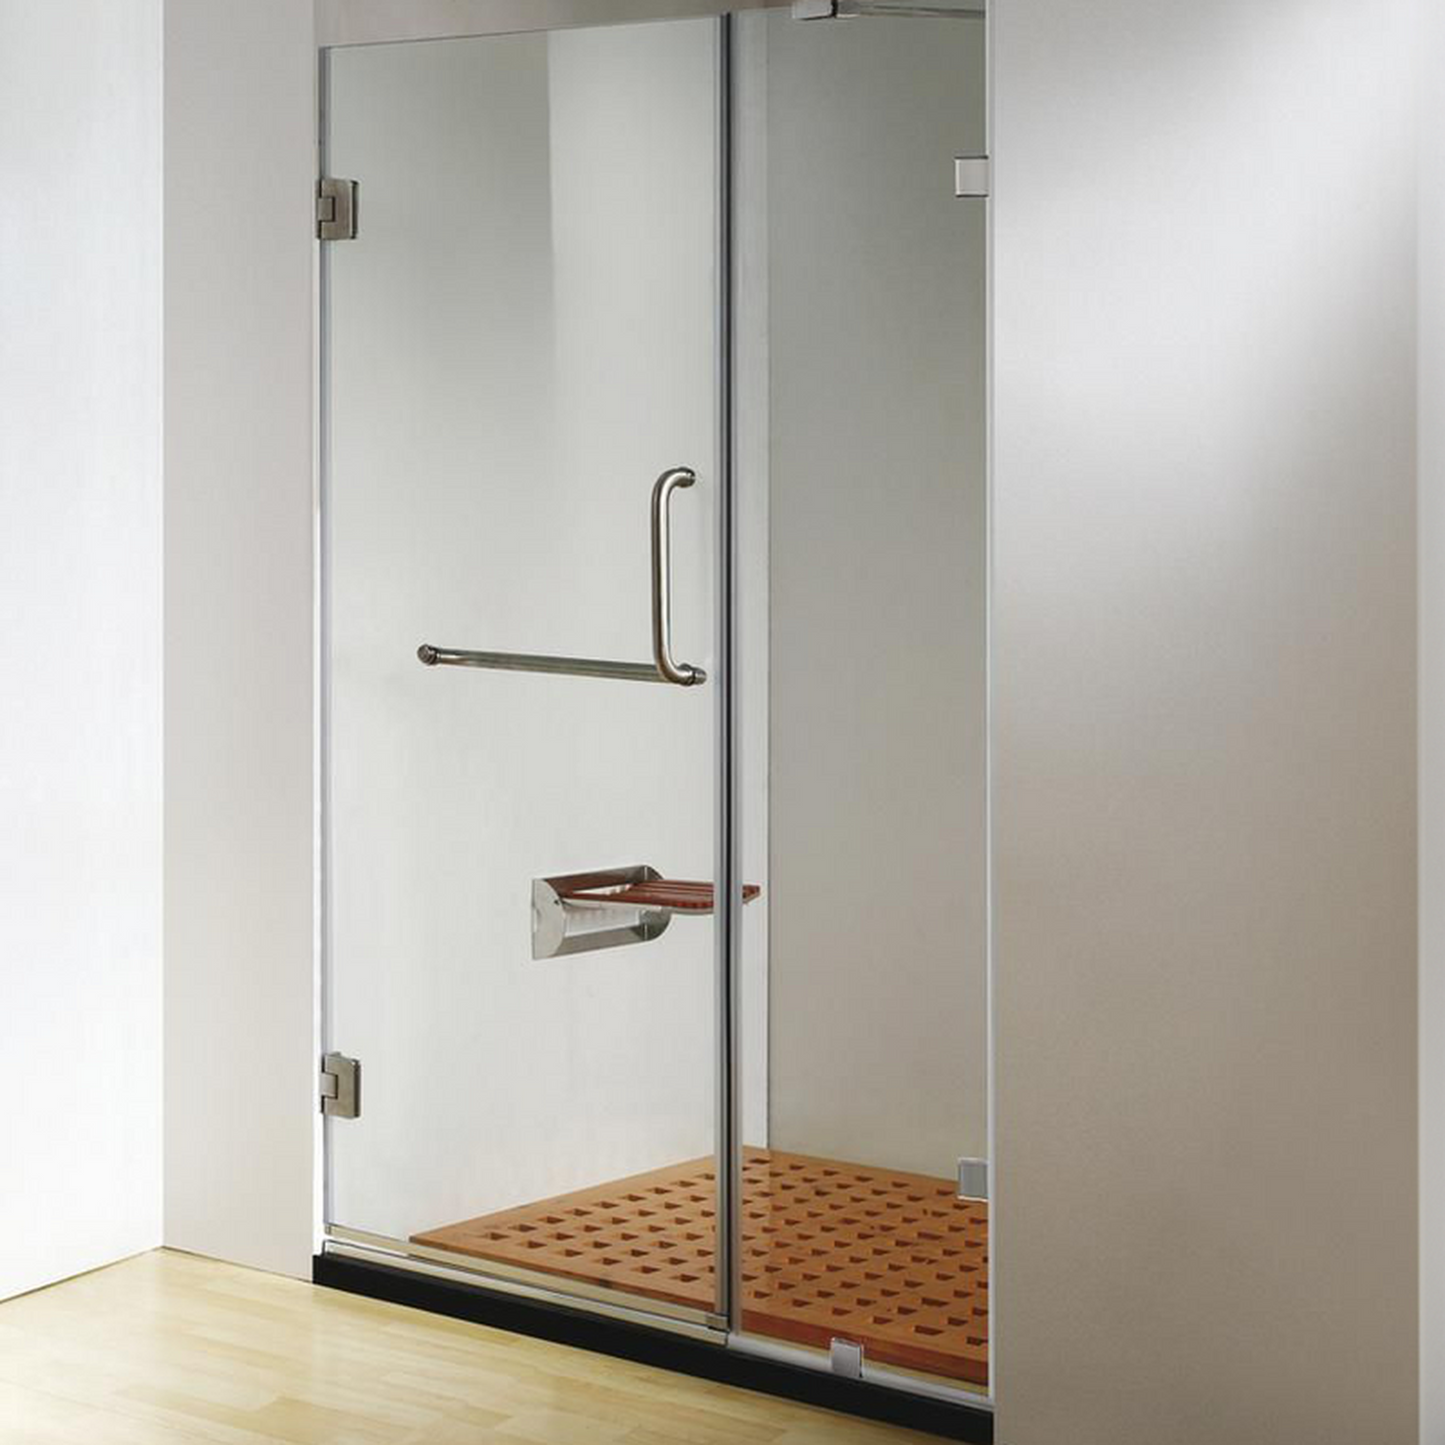 Dreamwerks 60" x 79" Clear Glass Frameless Hinged Shower Door With Chrome Handle and Towel Bar